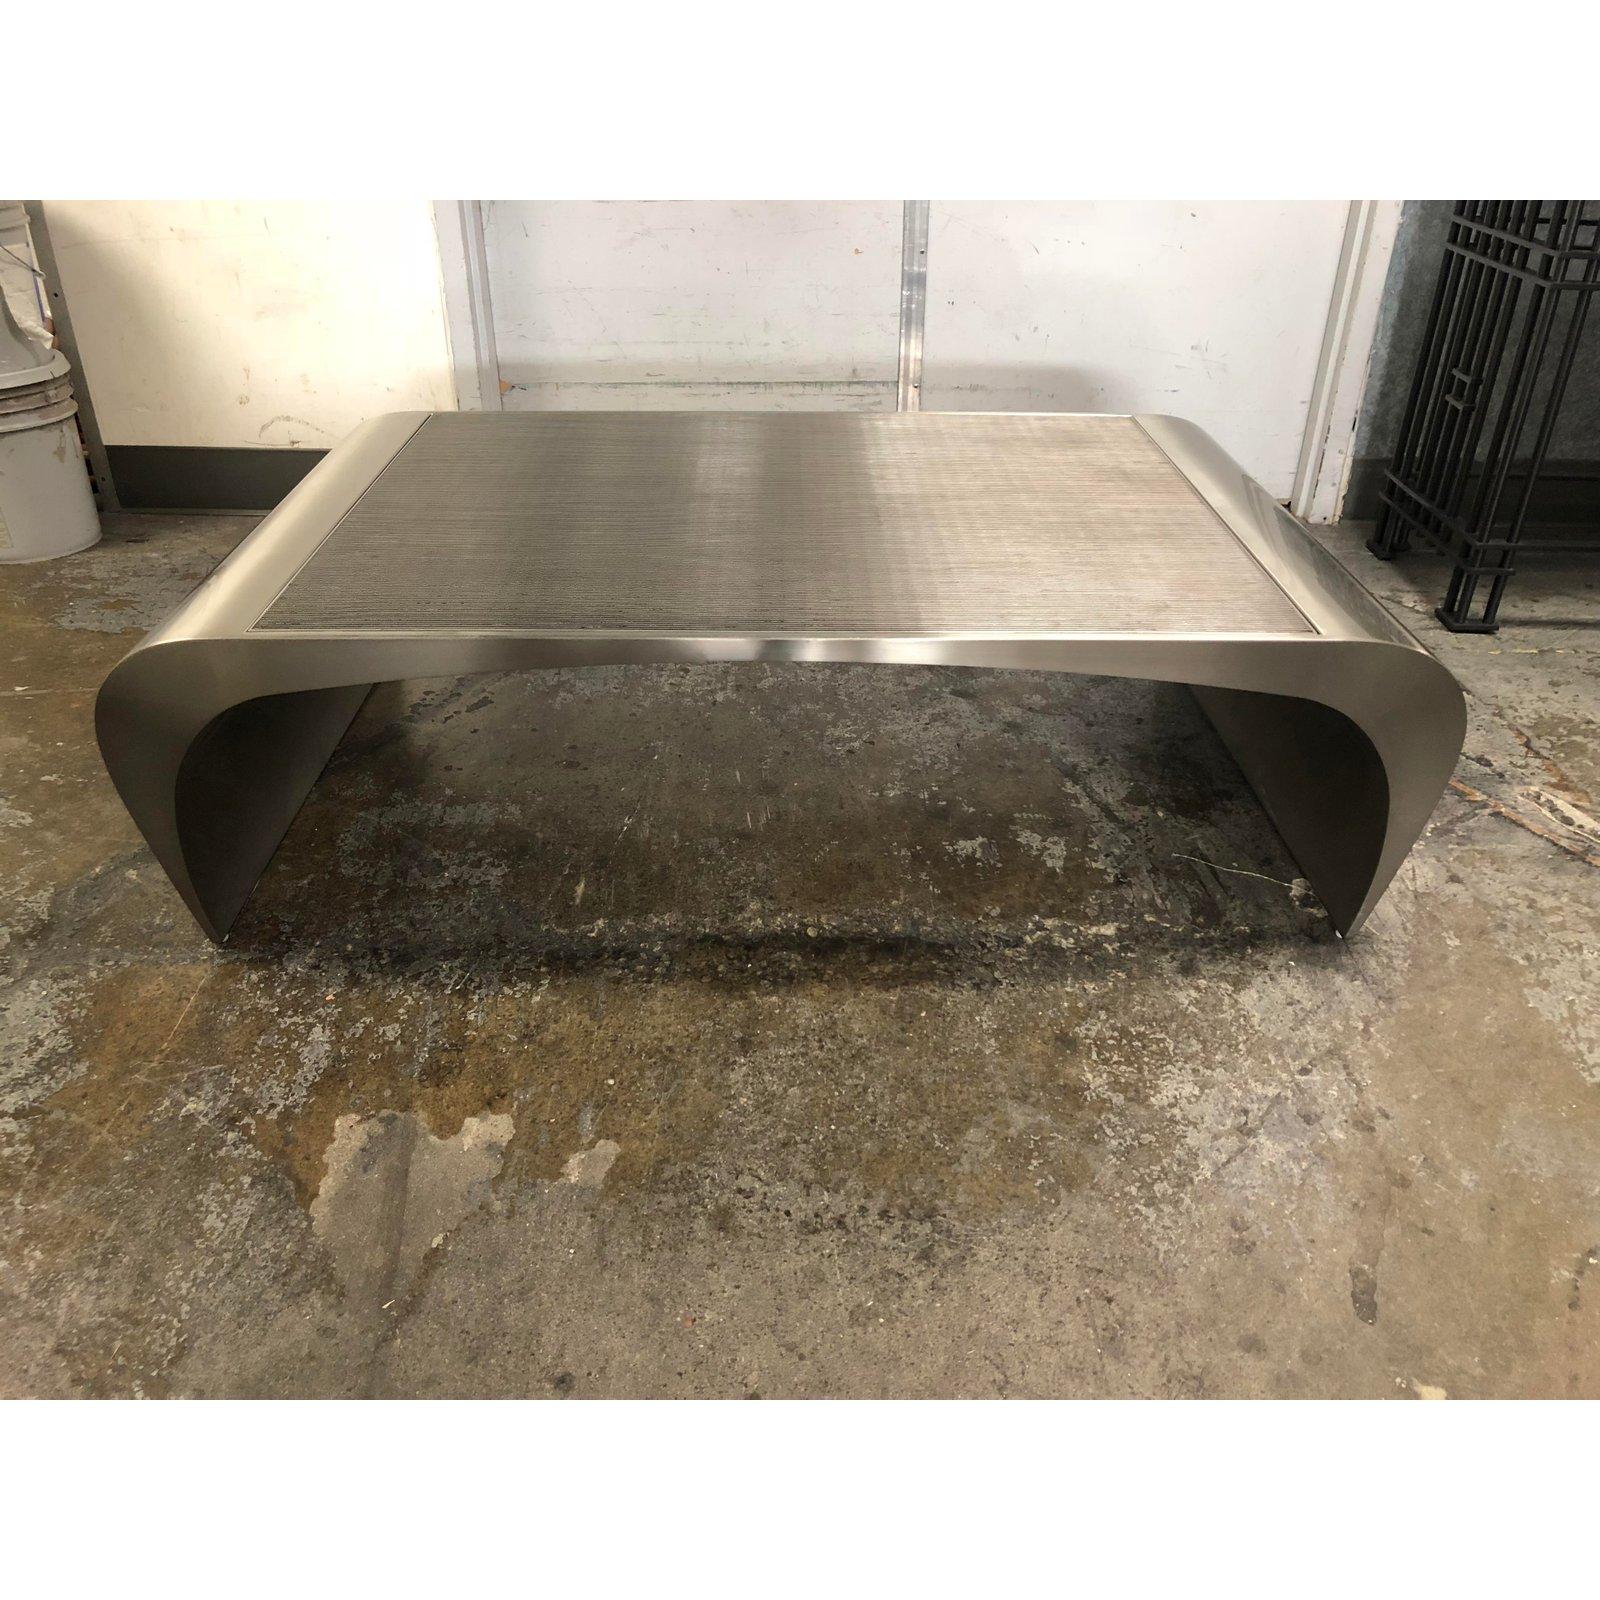 A curved, brushed steel coffee table with a metal grate top. Durable and industrial, this piece sports minor blemishes on the metal finish. Like a jet engine that just landed in your living room, this piece boasts curved and flared ends, streamlined